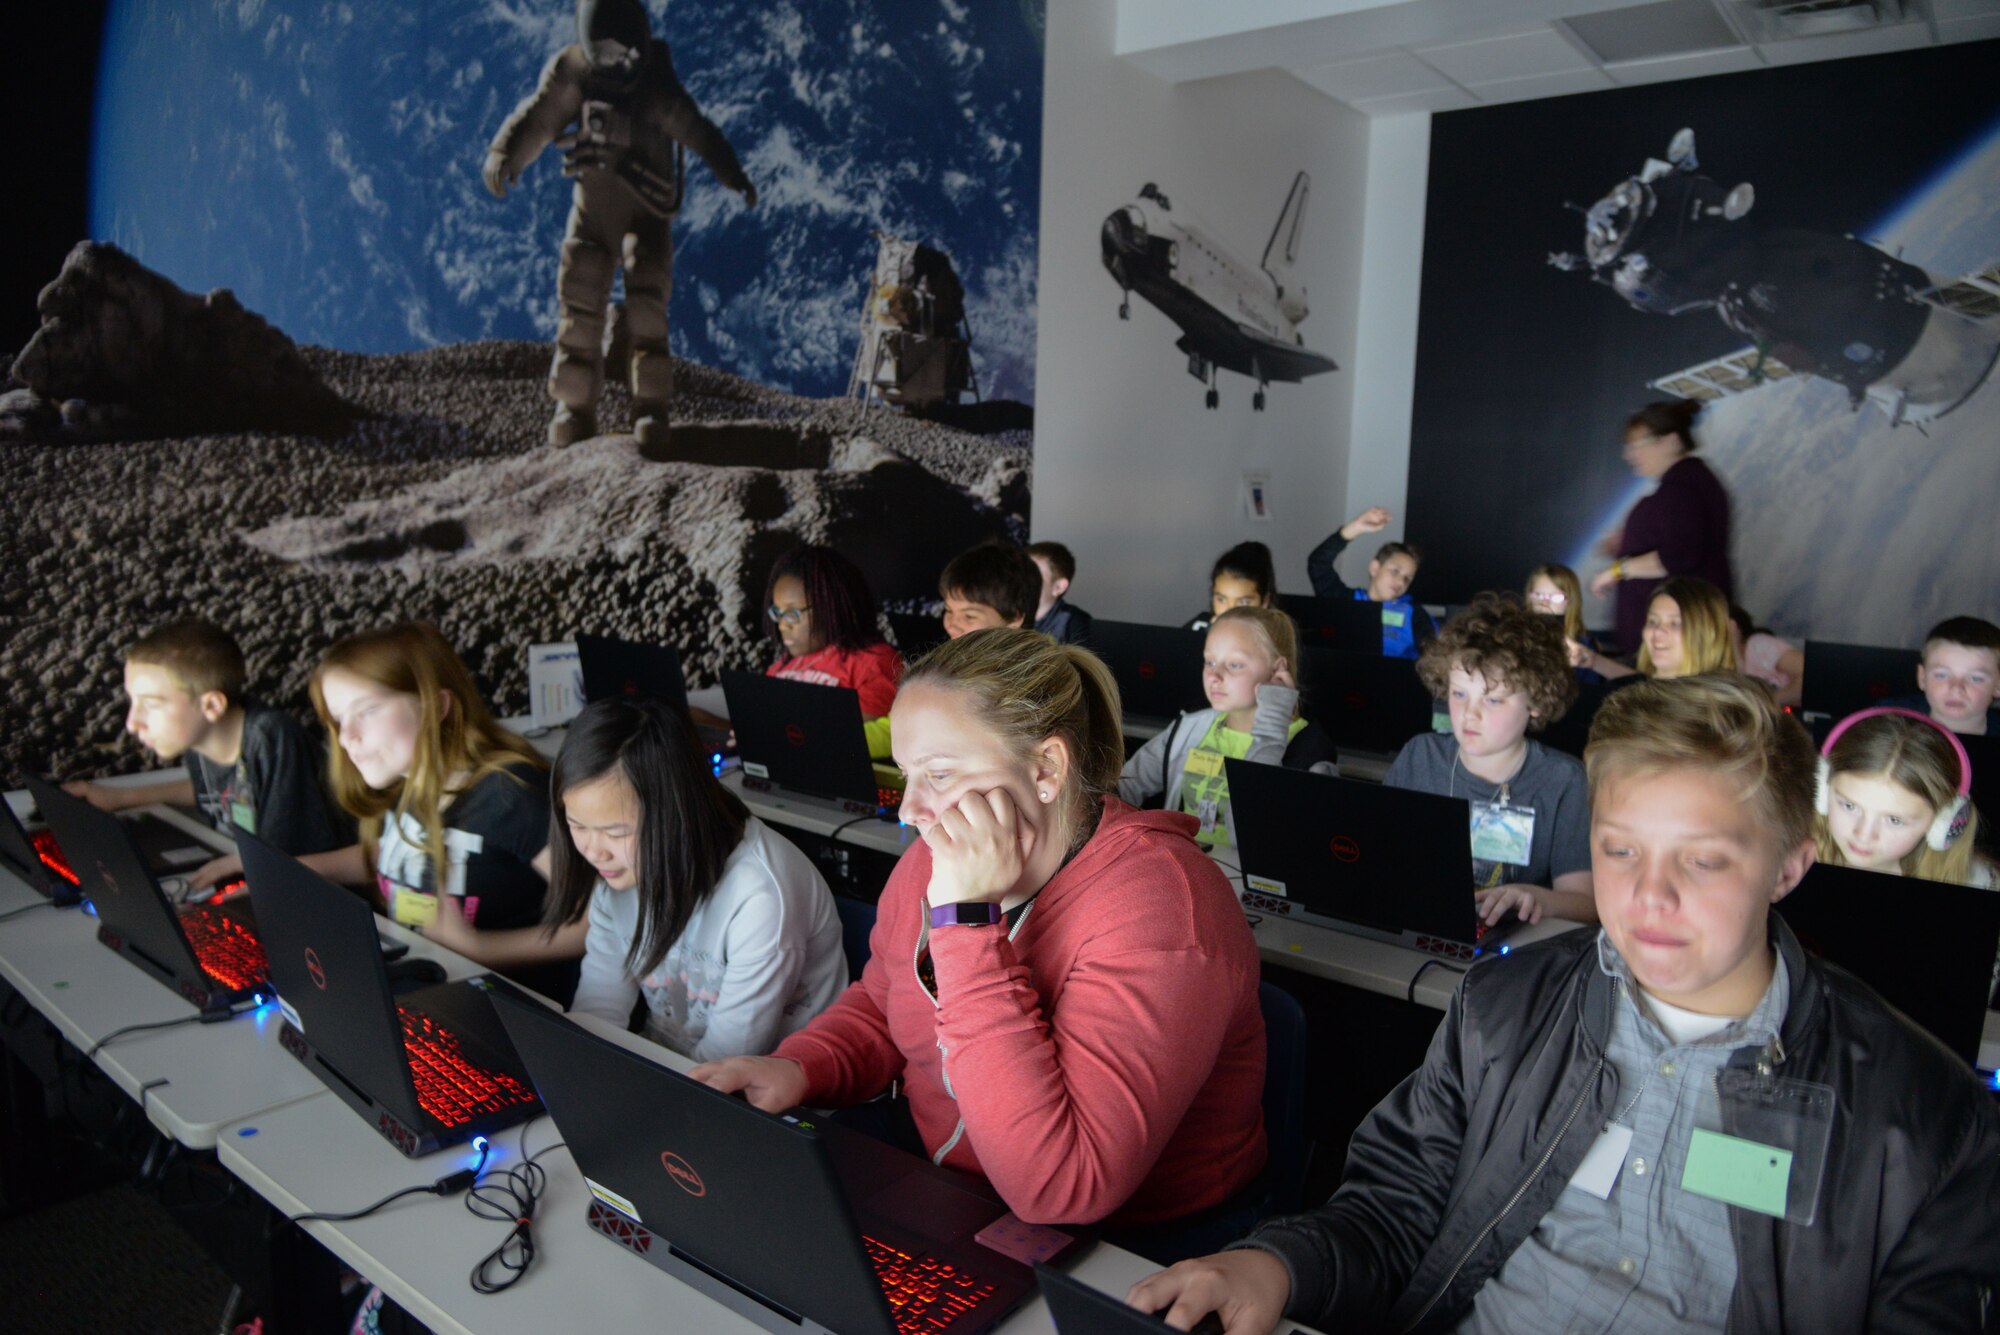 Sixth graders from King Elementary in Layton, Utah, learn computer-aided design during Starbase at Hill Air Force Base March 14, 2018. Starbase is a nationwide program that aims to introduce elementary school students to science, technology, engineering and math and is funded entirely by the Department of Defense.(U.S. Air Force photo by Cynthia Griggs)